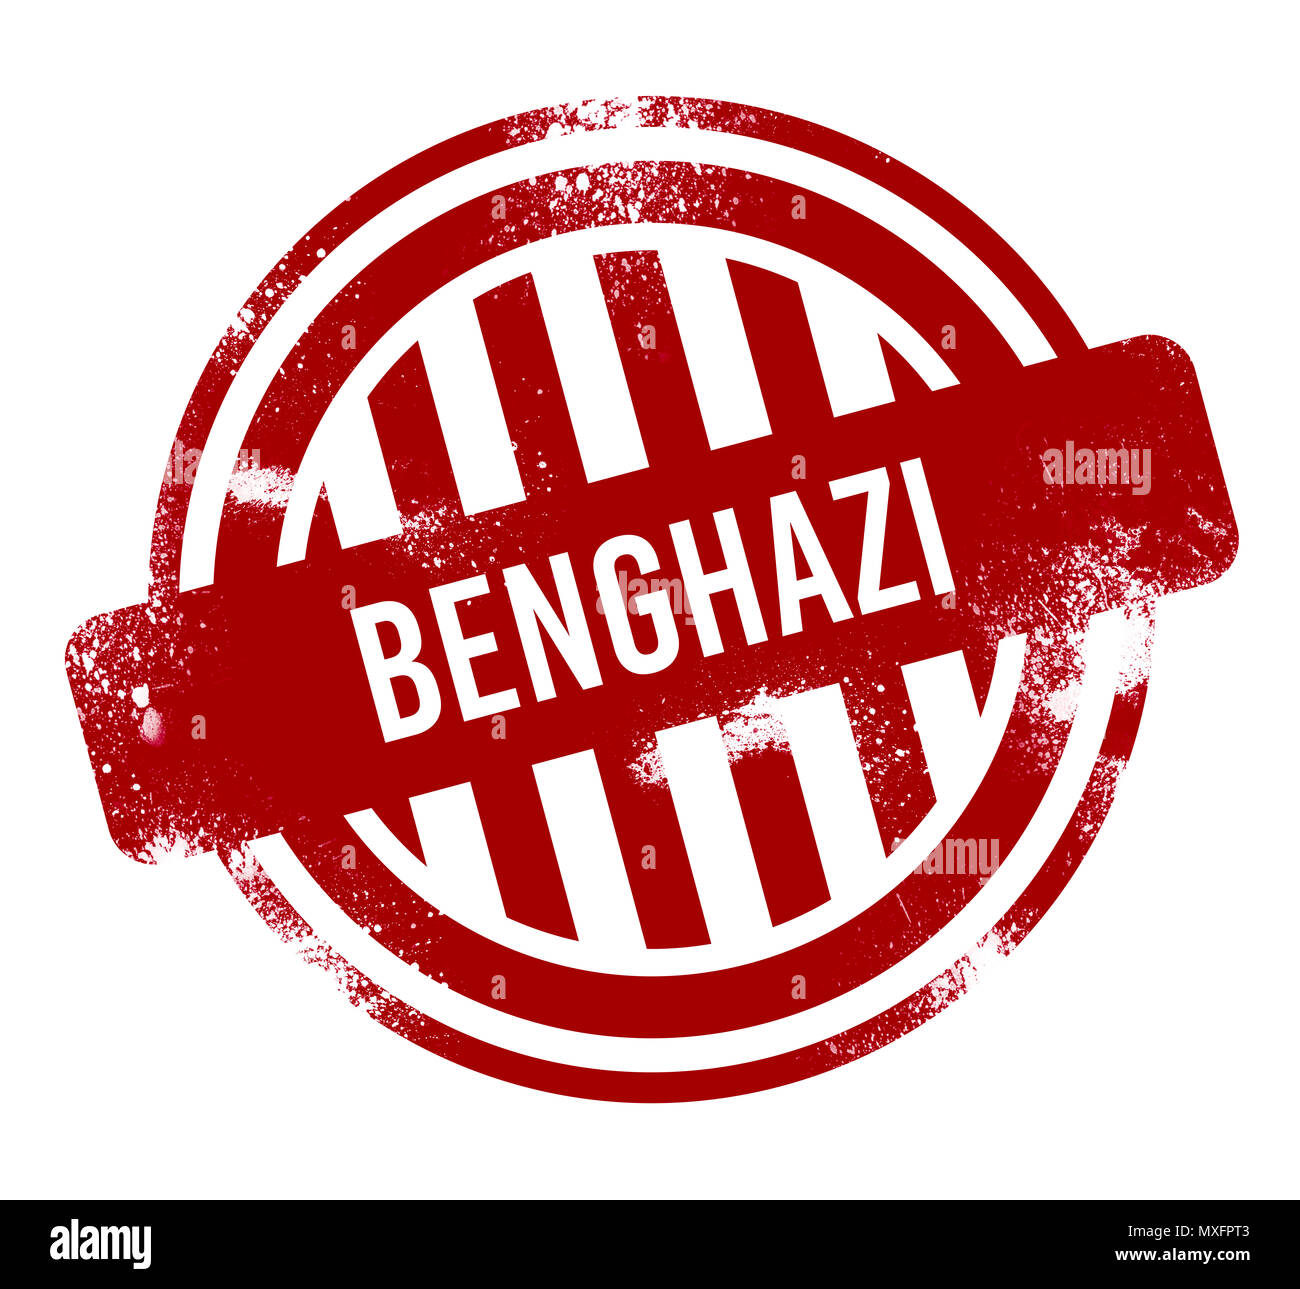 Benghazi - Red grunge button, stamp Stock Photo